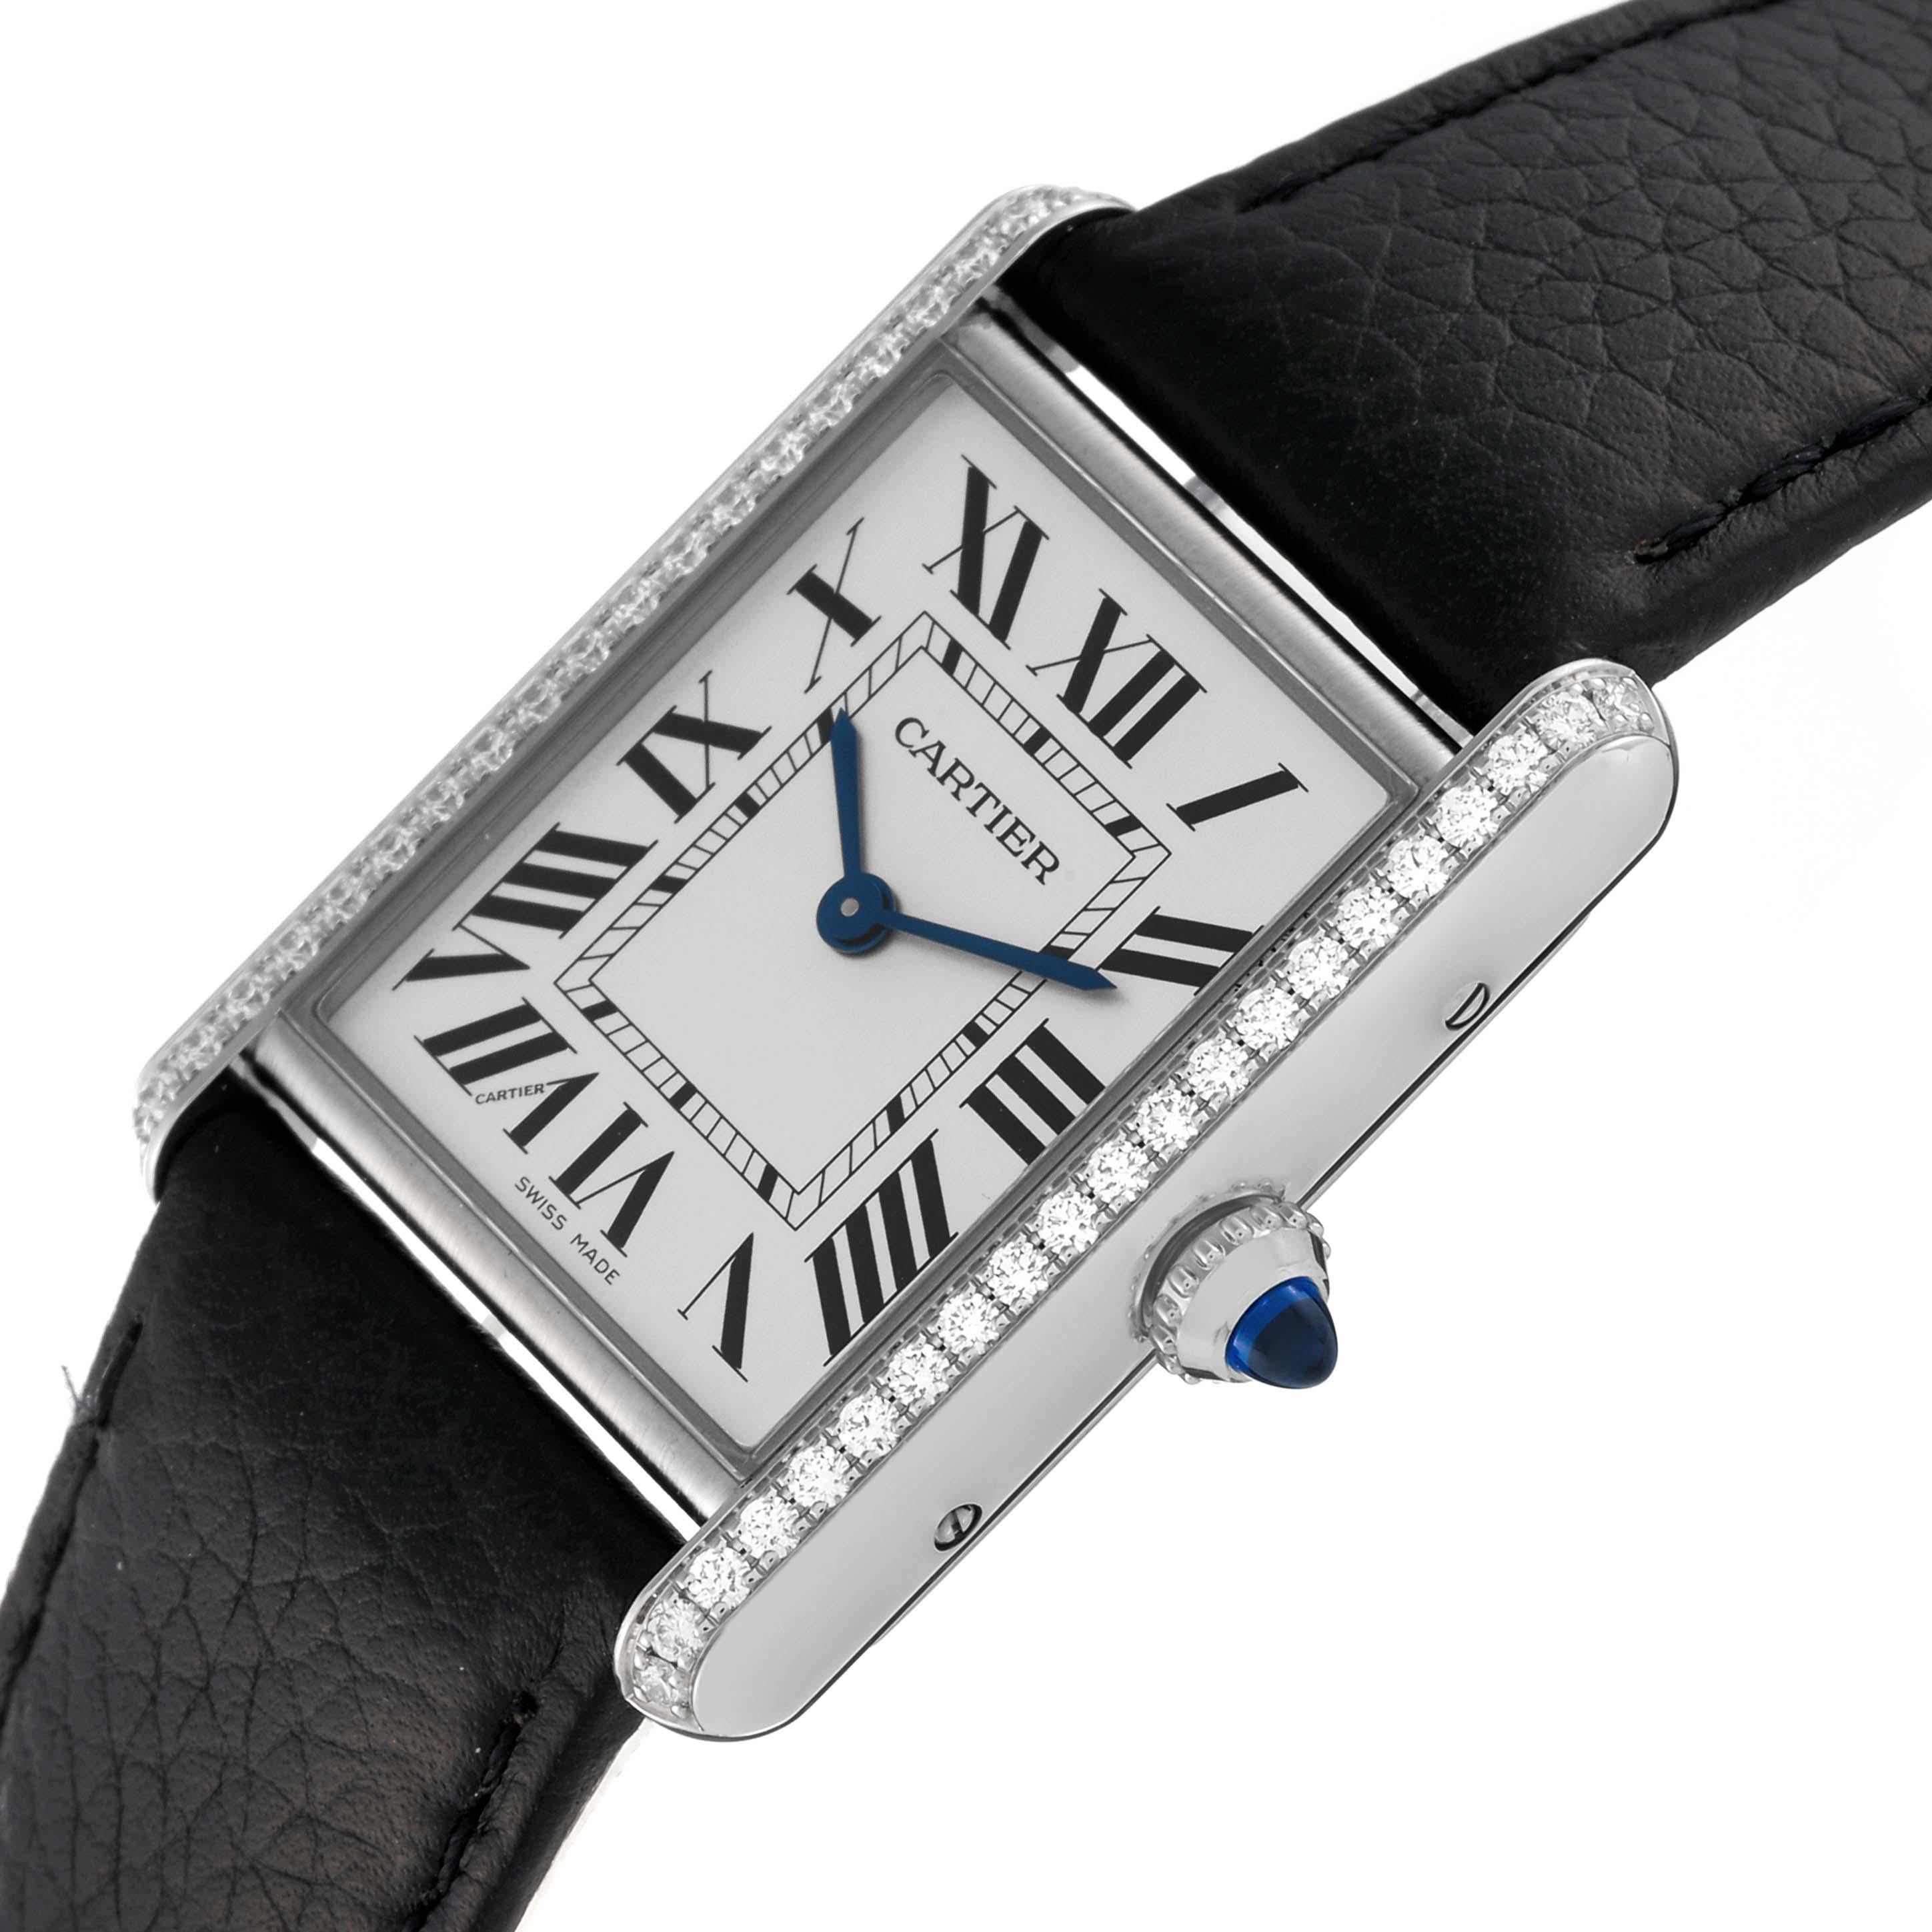 Cartier Tank Must Large Steel Silver Dial Diamond Ladies Watch W4TA0017 Box Card. Quartz movement. Stainless steel case 33.7 x 25.5 mm. Circular grained crown set with a blue spinel cabochon. Original Cartier factory diamond bezel. Scratch resistant